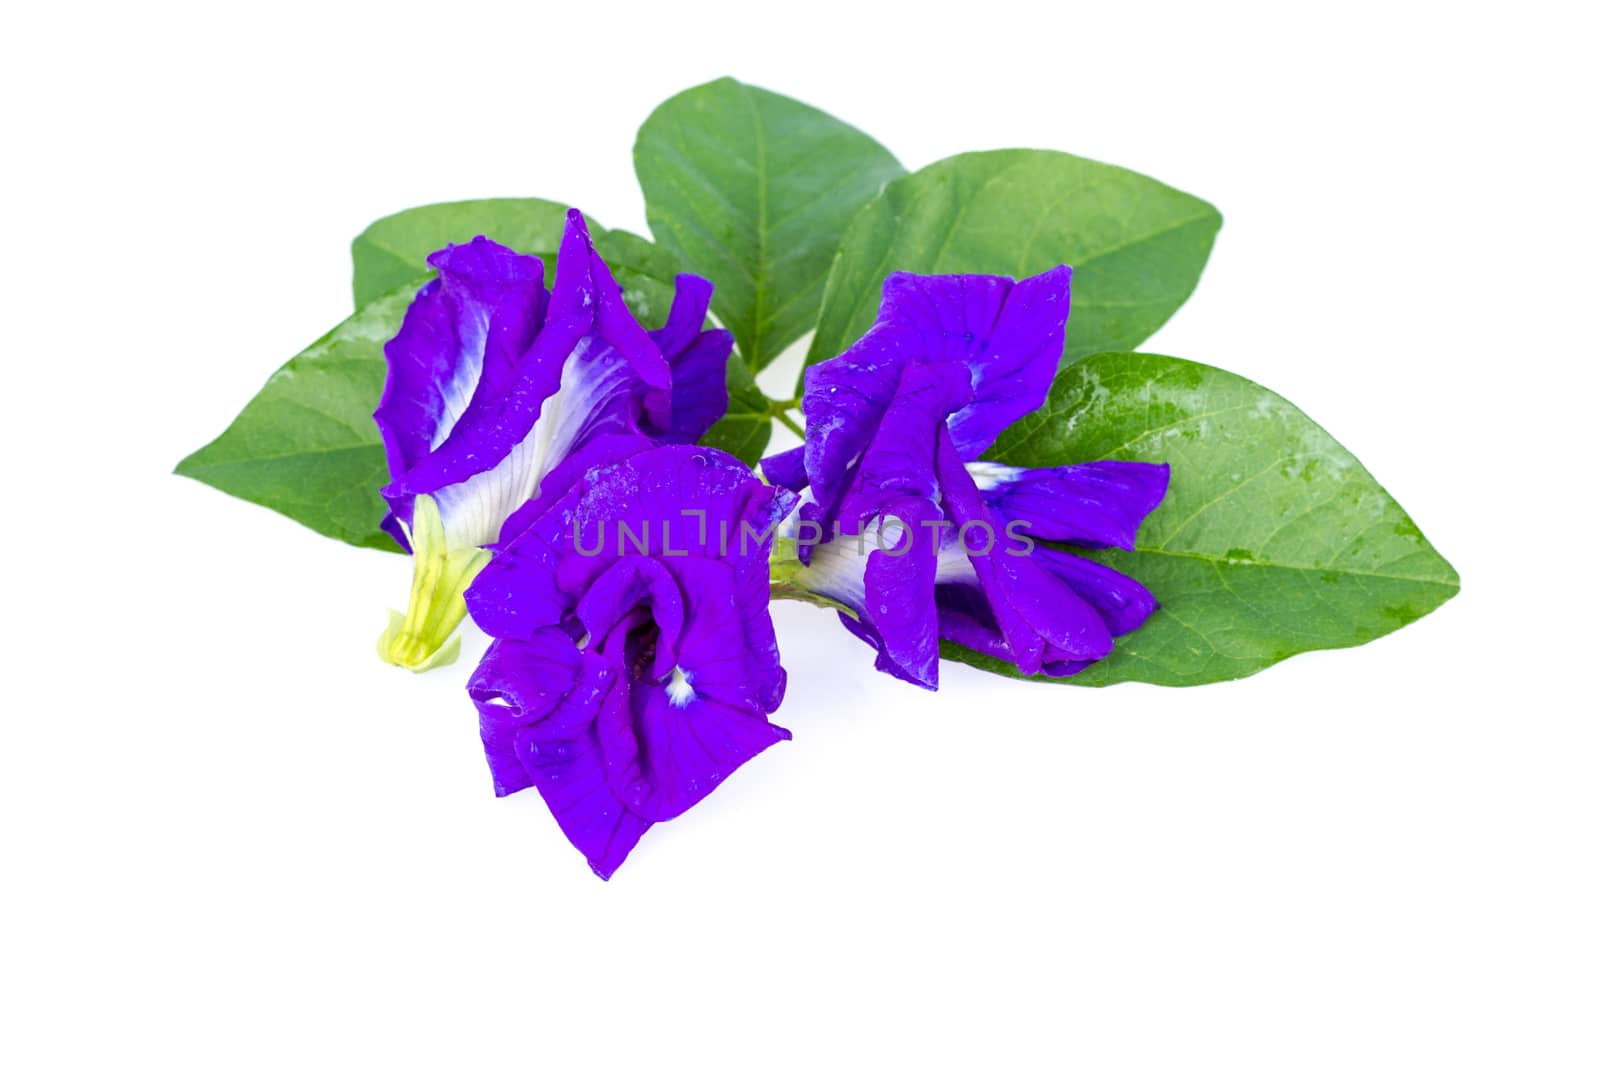 Butterfly pea flower with leaves on white background